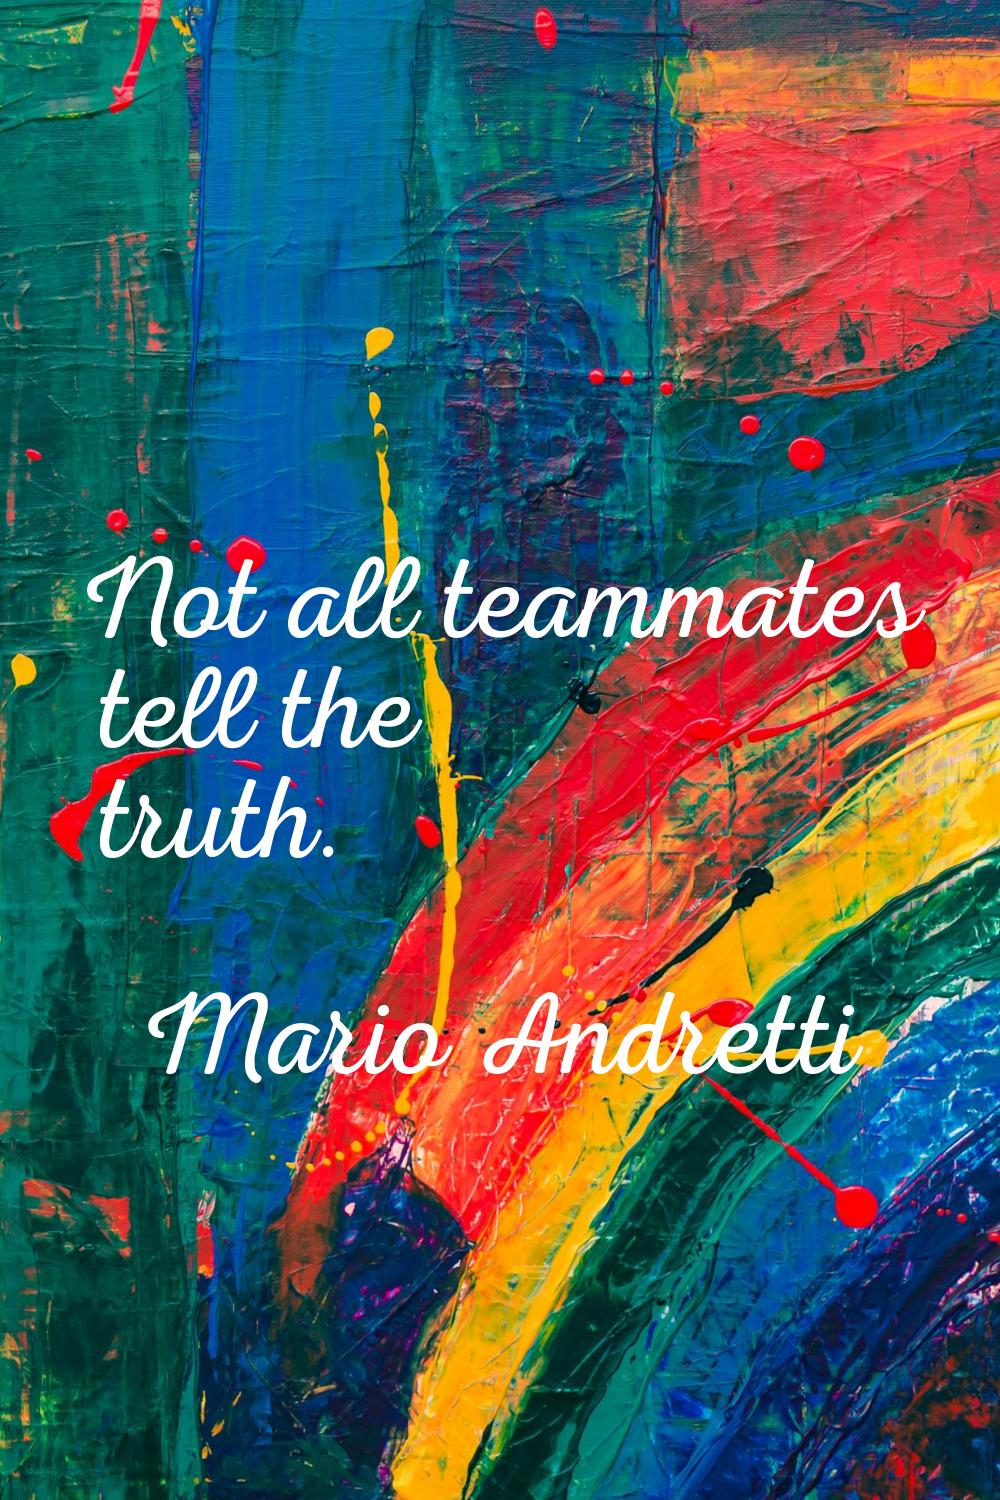 Not all teammates tell the truth.